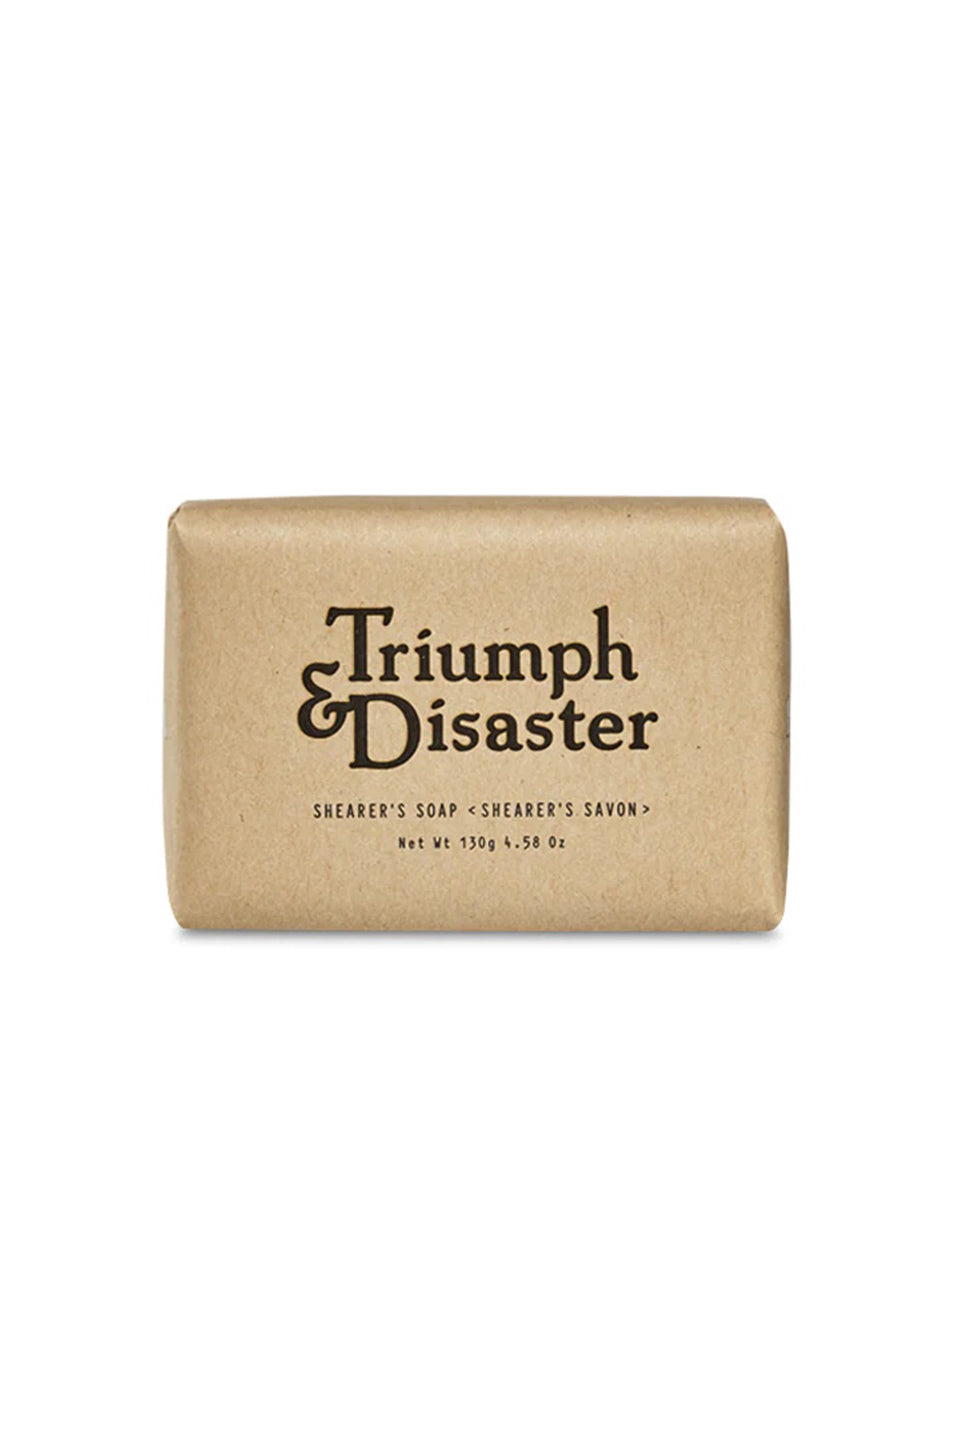 Triumph & Disaster - Shearers Soap Bar - Package